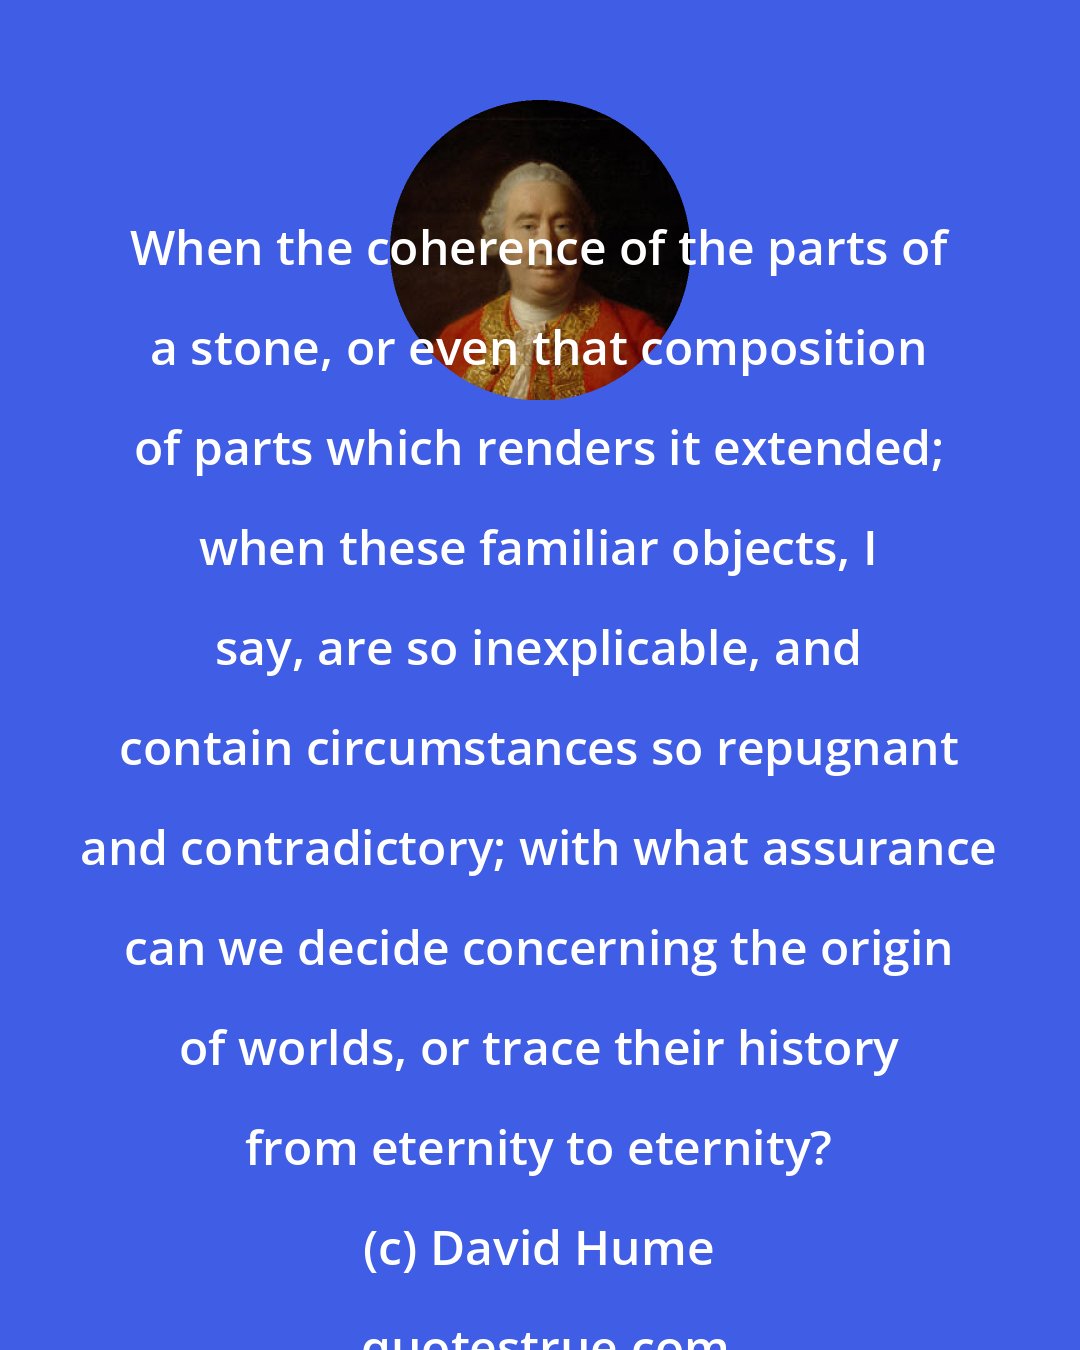 David Hume: When the coherence of the parts of a stone, or even that composition of parts which renders it extended; when these familiar objects, I say, are so inexplicable, and contain circumstances so repugnant and contradictory; with what assurance can we decide concerning the origin of worlds, or trace their history from eternity to eternity?